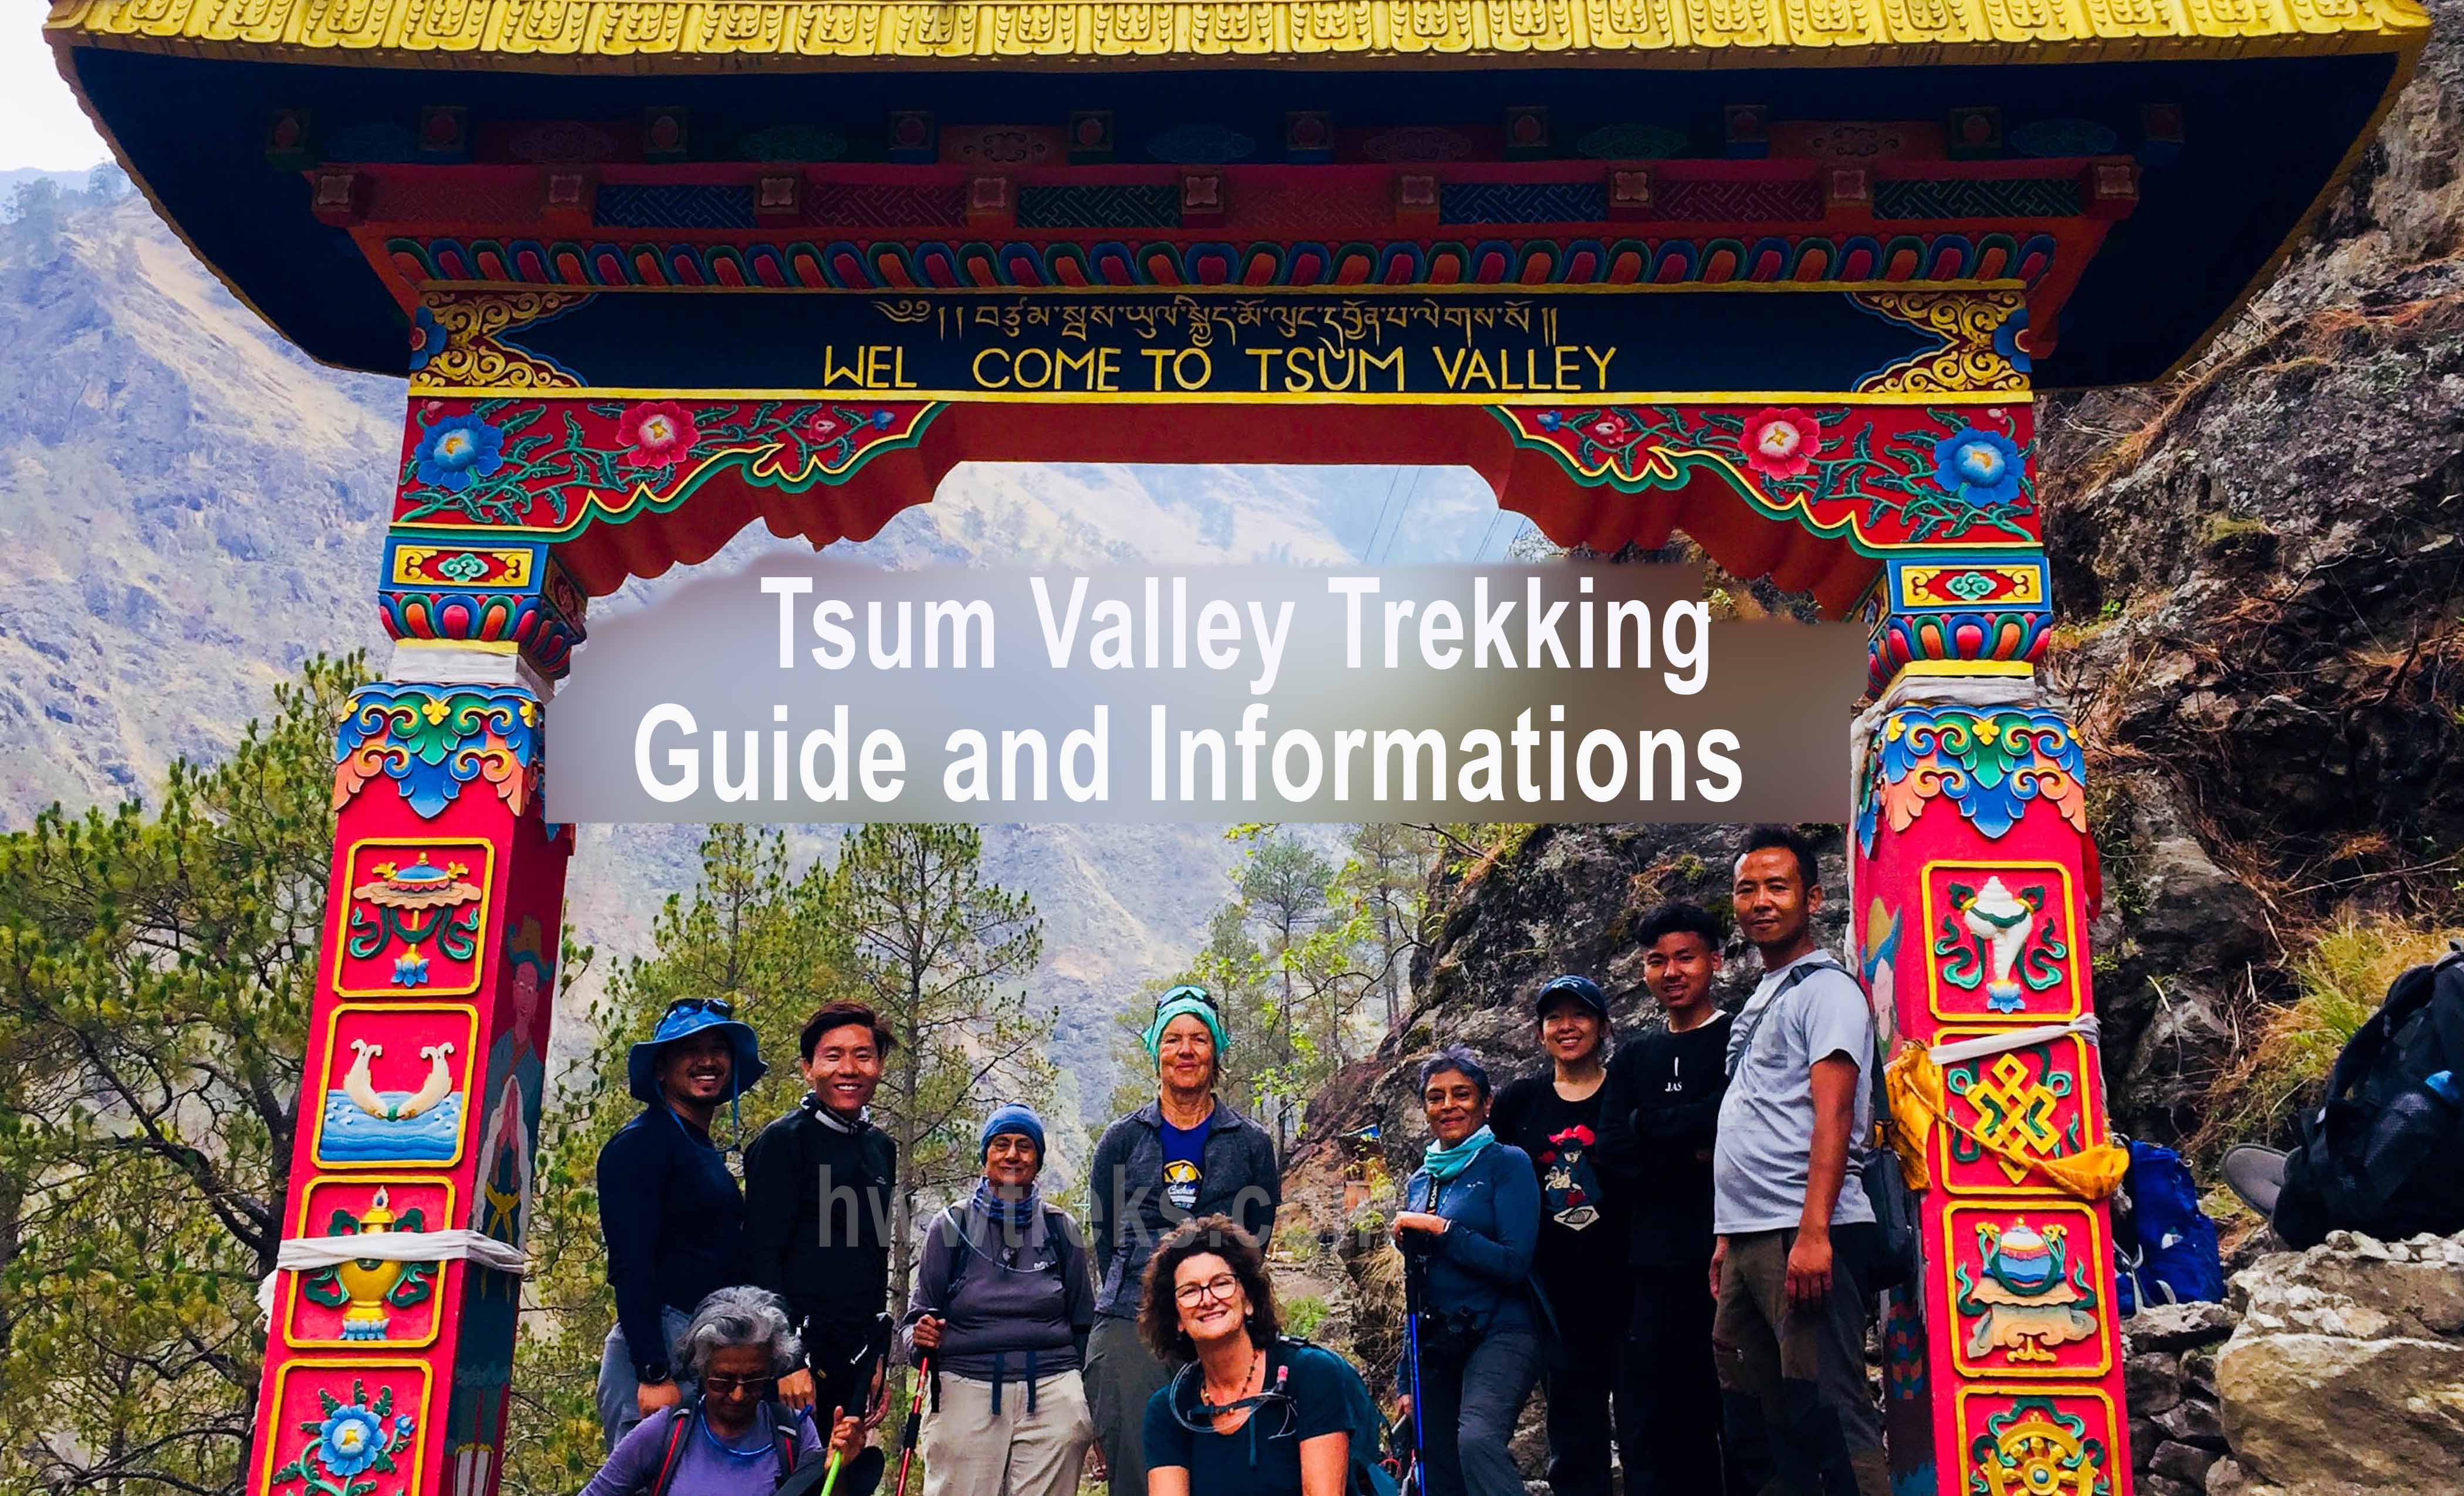 A Complete Trekking Guide for Tsum Valley